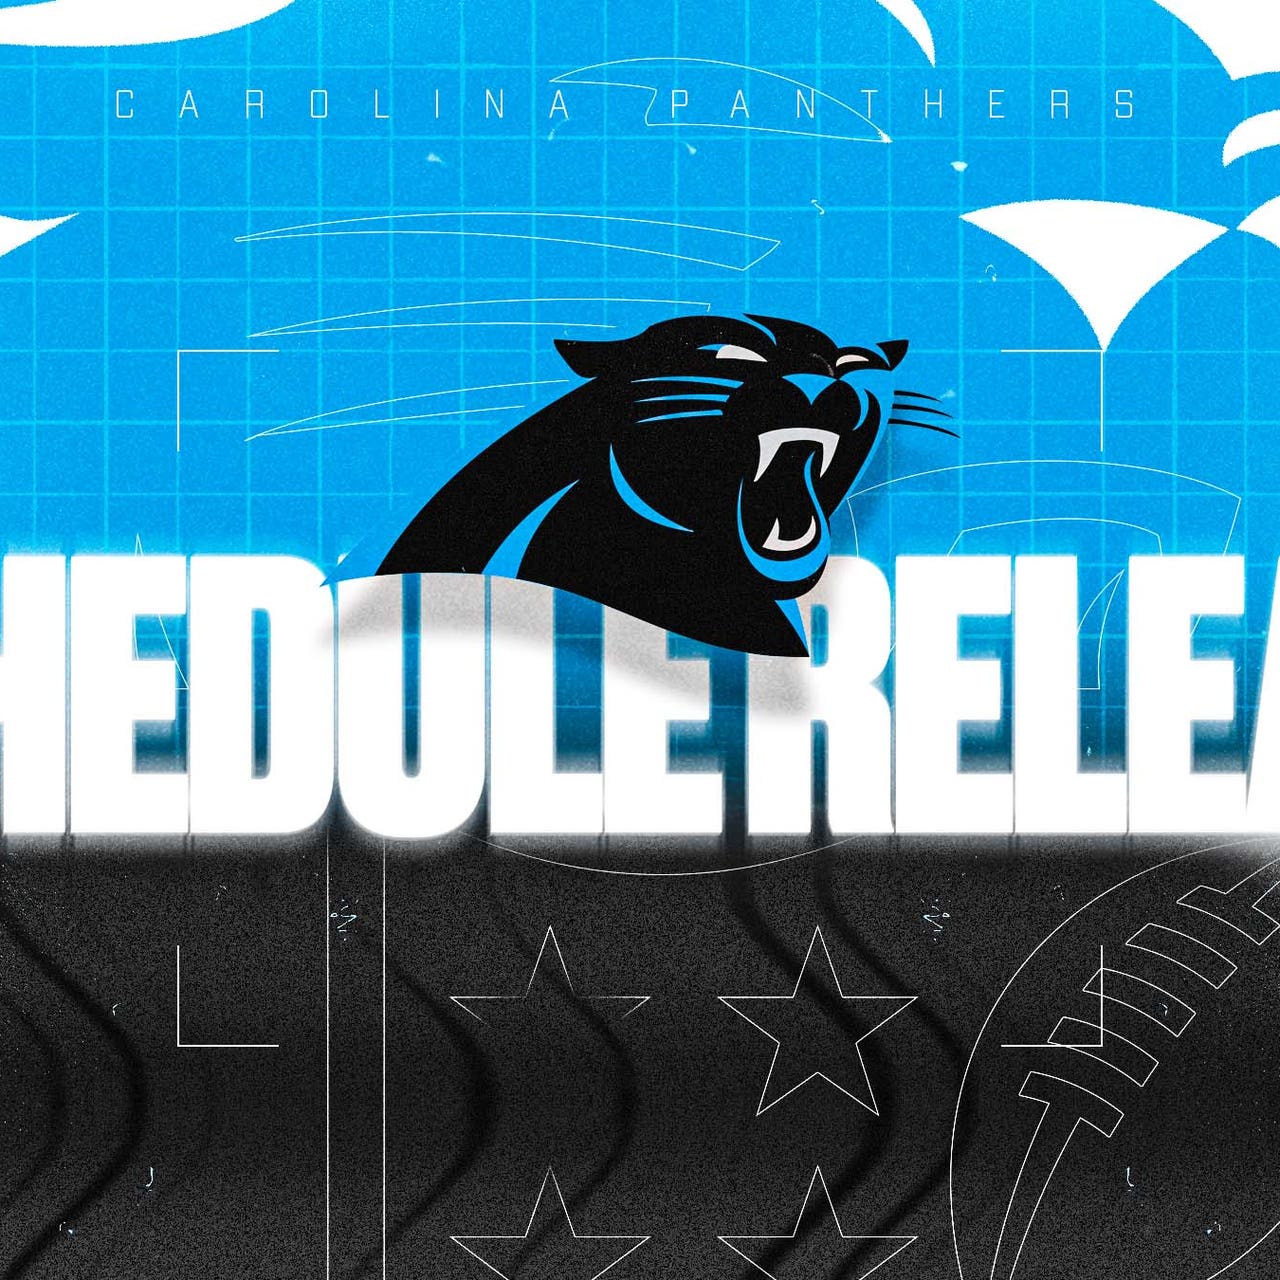 Carolina Panthers 2022 schedule released